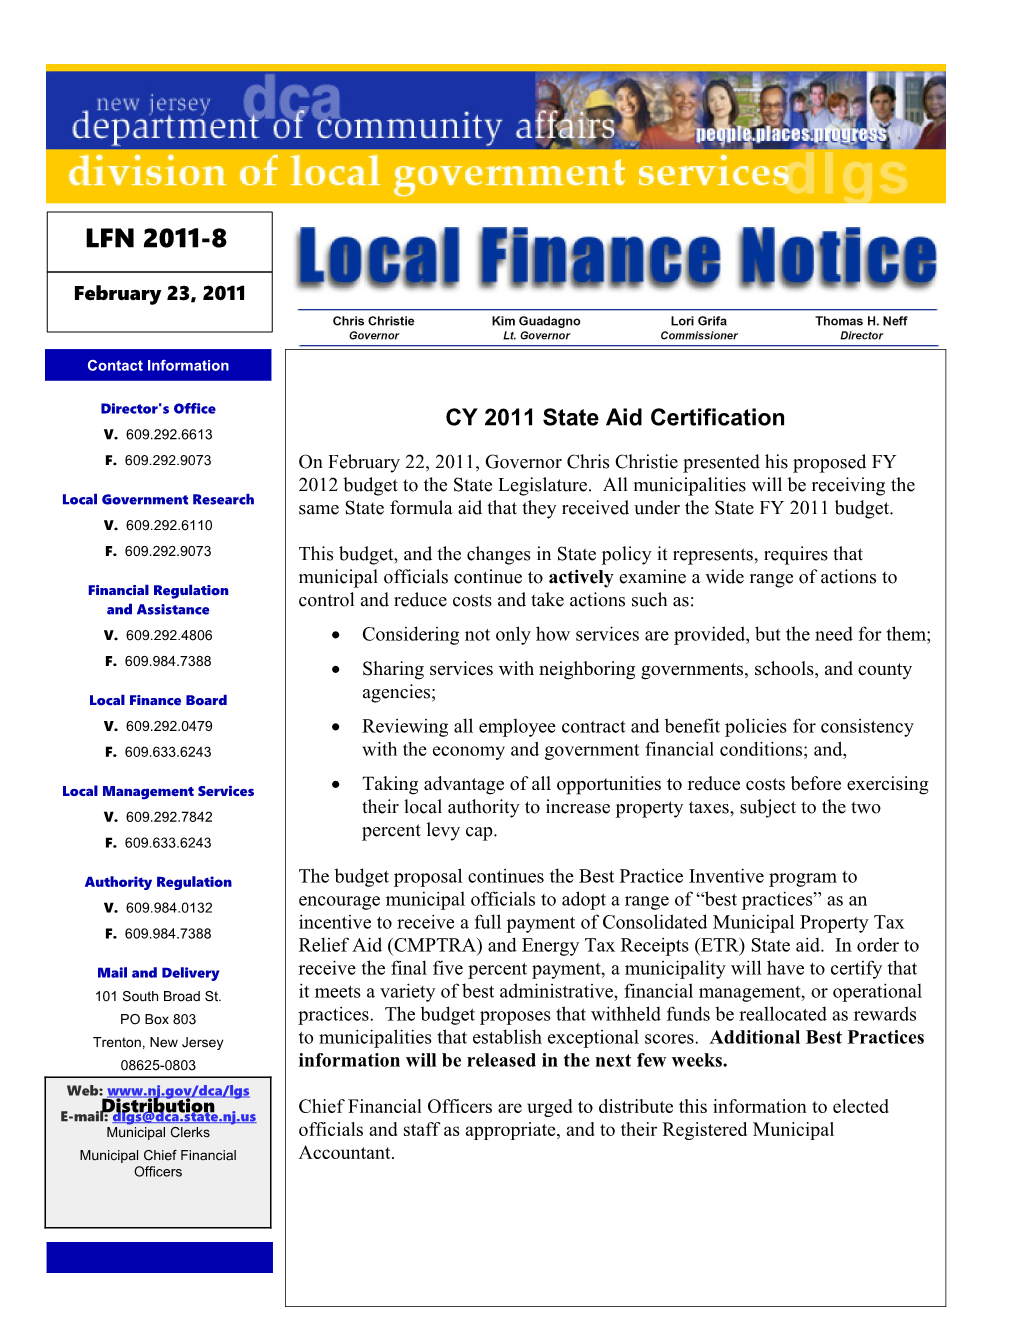 Local Finance Notice 2011-8February 23, 2011Page 1